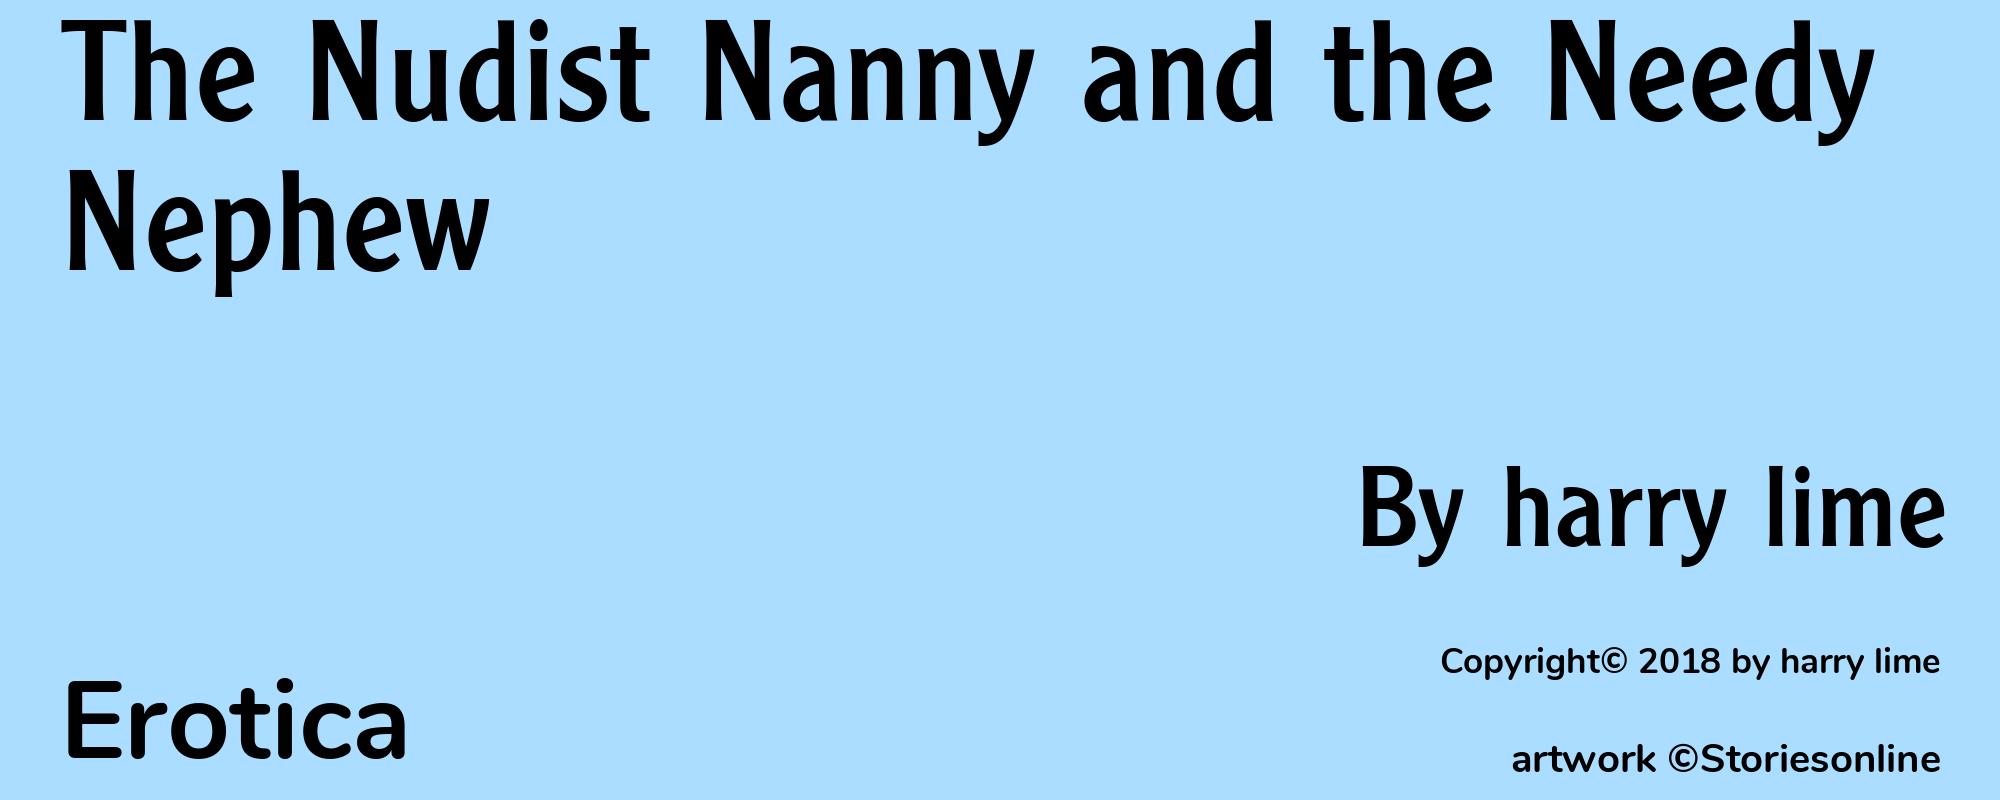 The Nudist Nanny and the Needy Nephew - Cover